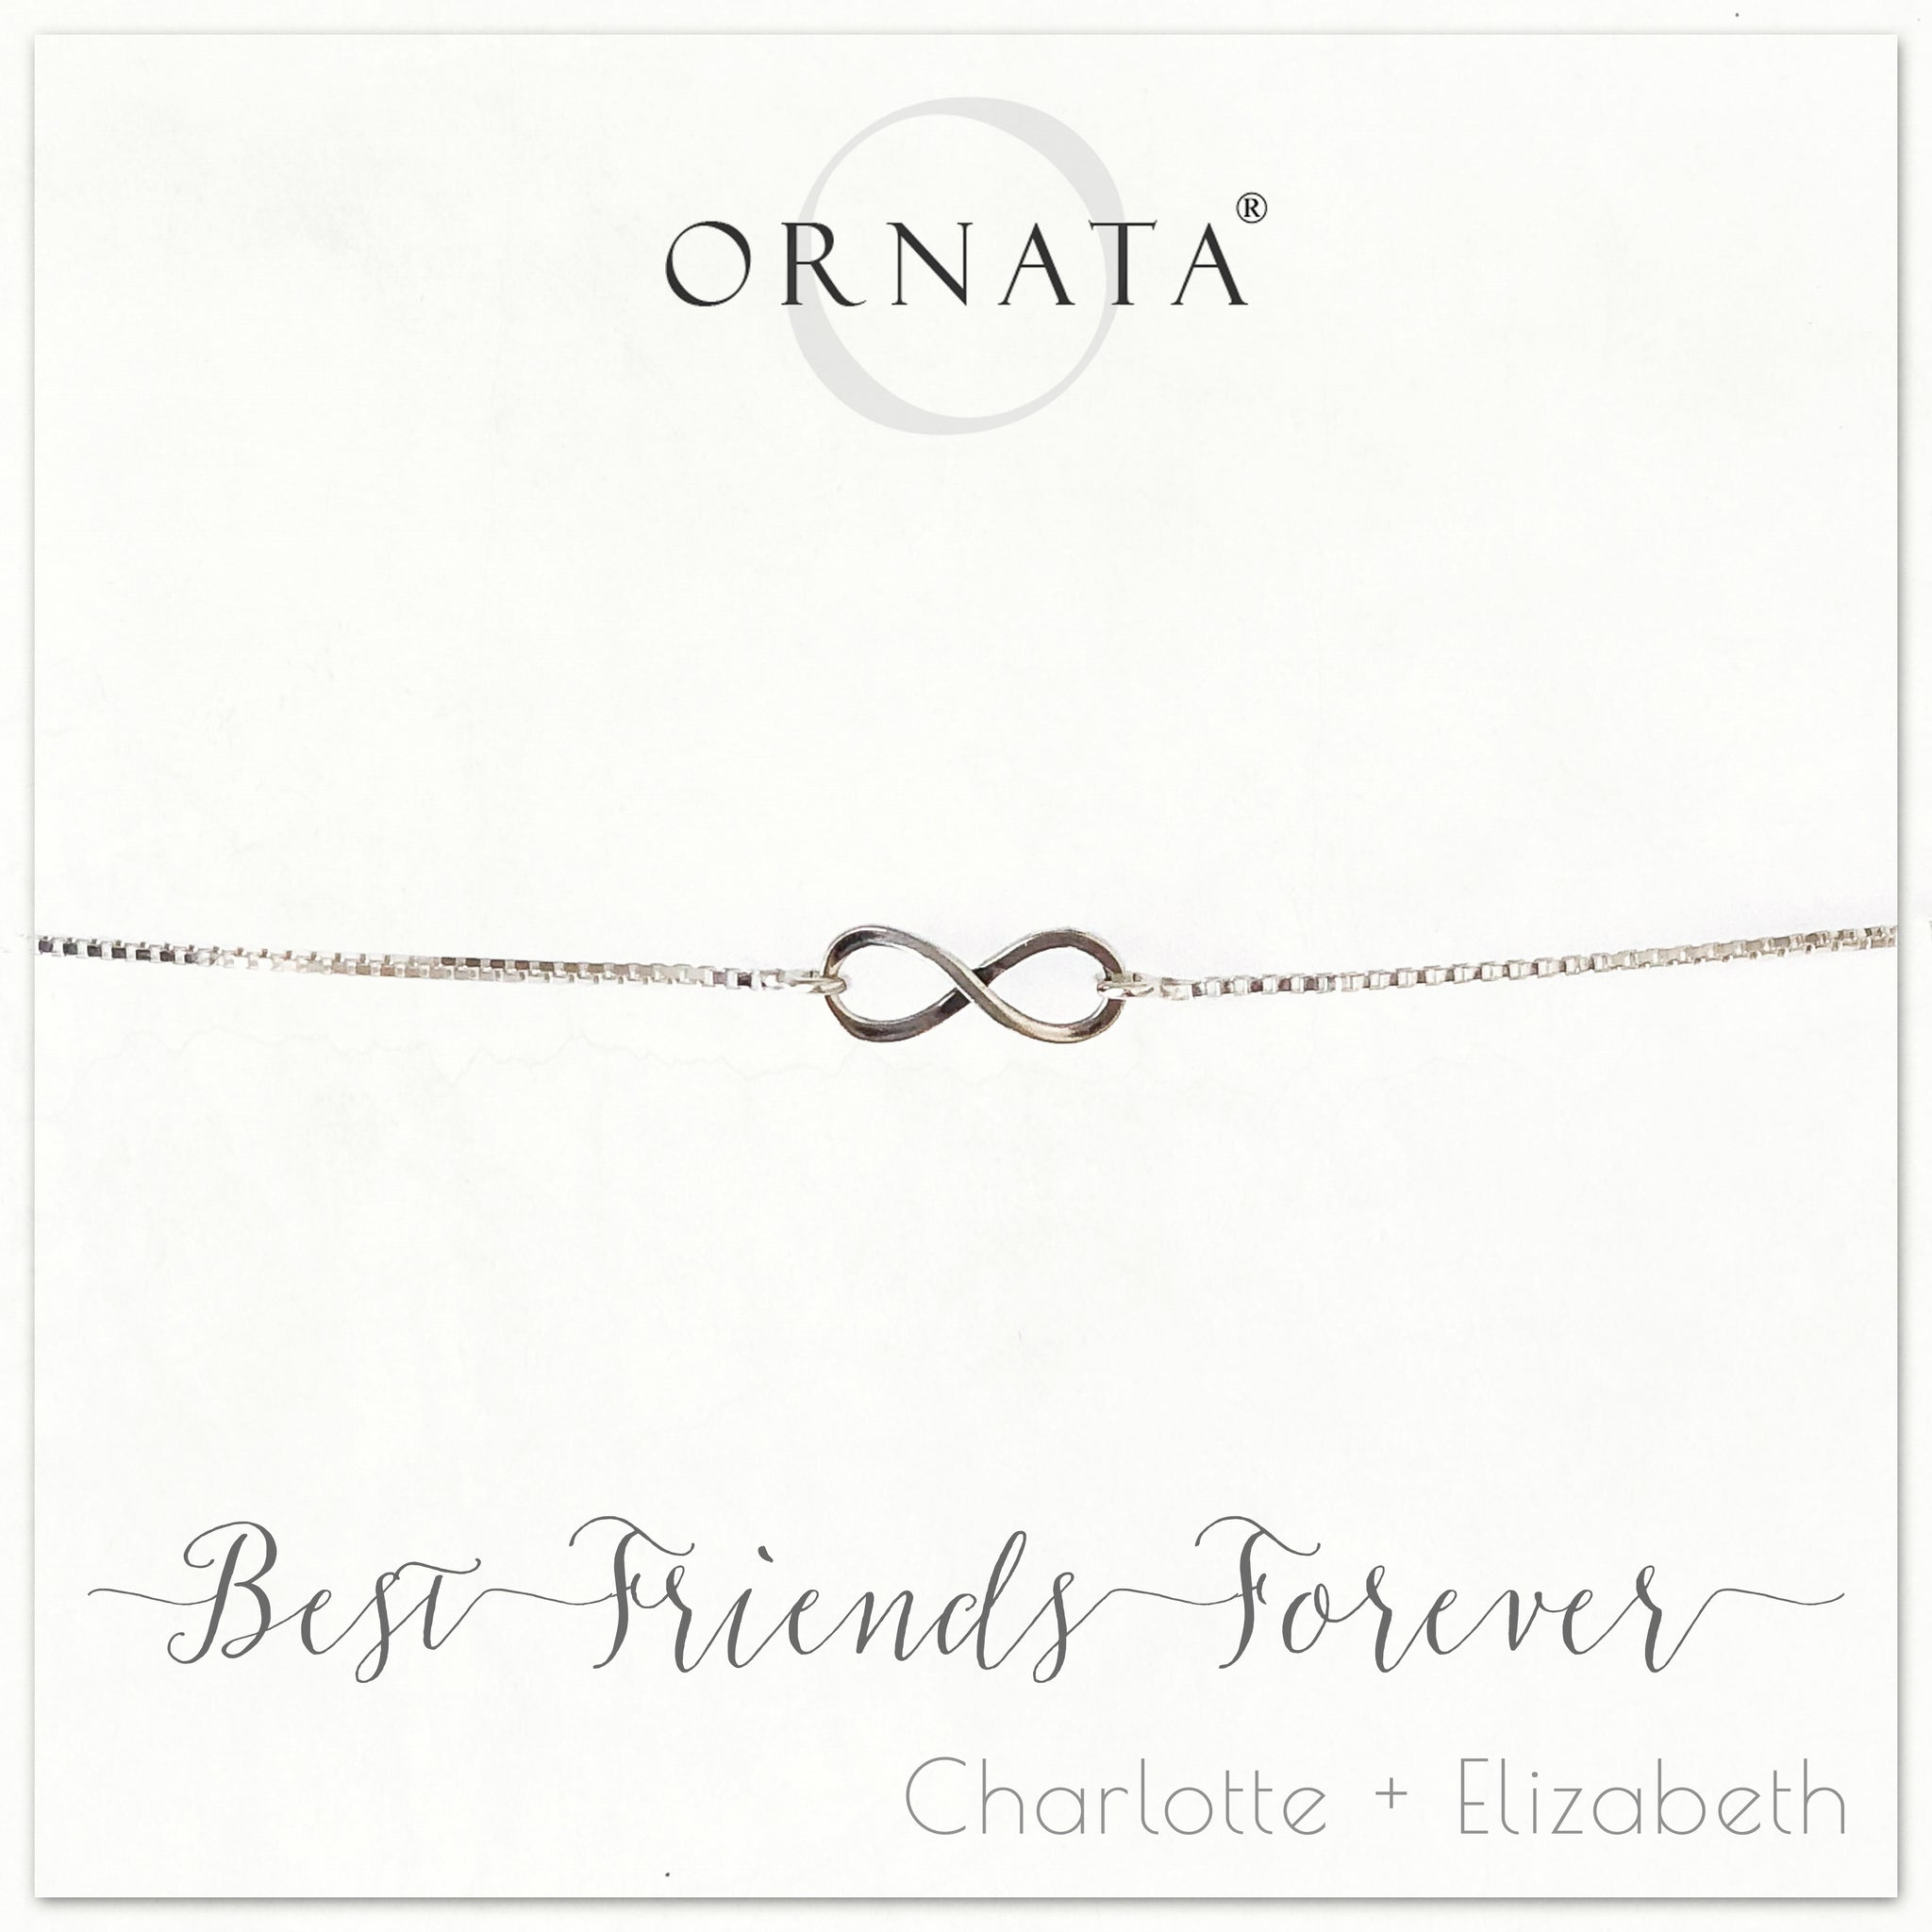 "Best Friends Forever" INFINITY STERLING SILVER BOLO BRACELET ON PERSONALIZED JEWELRY CARD